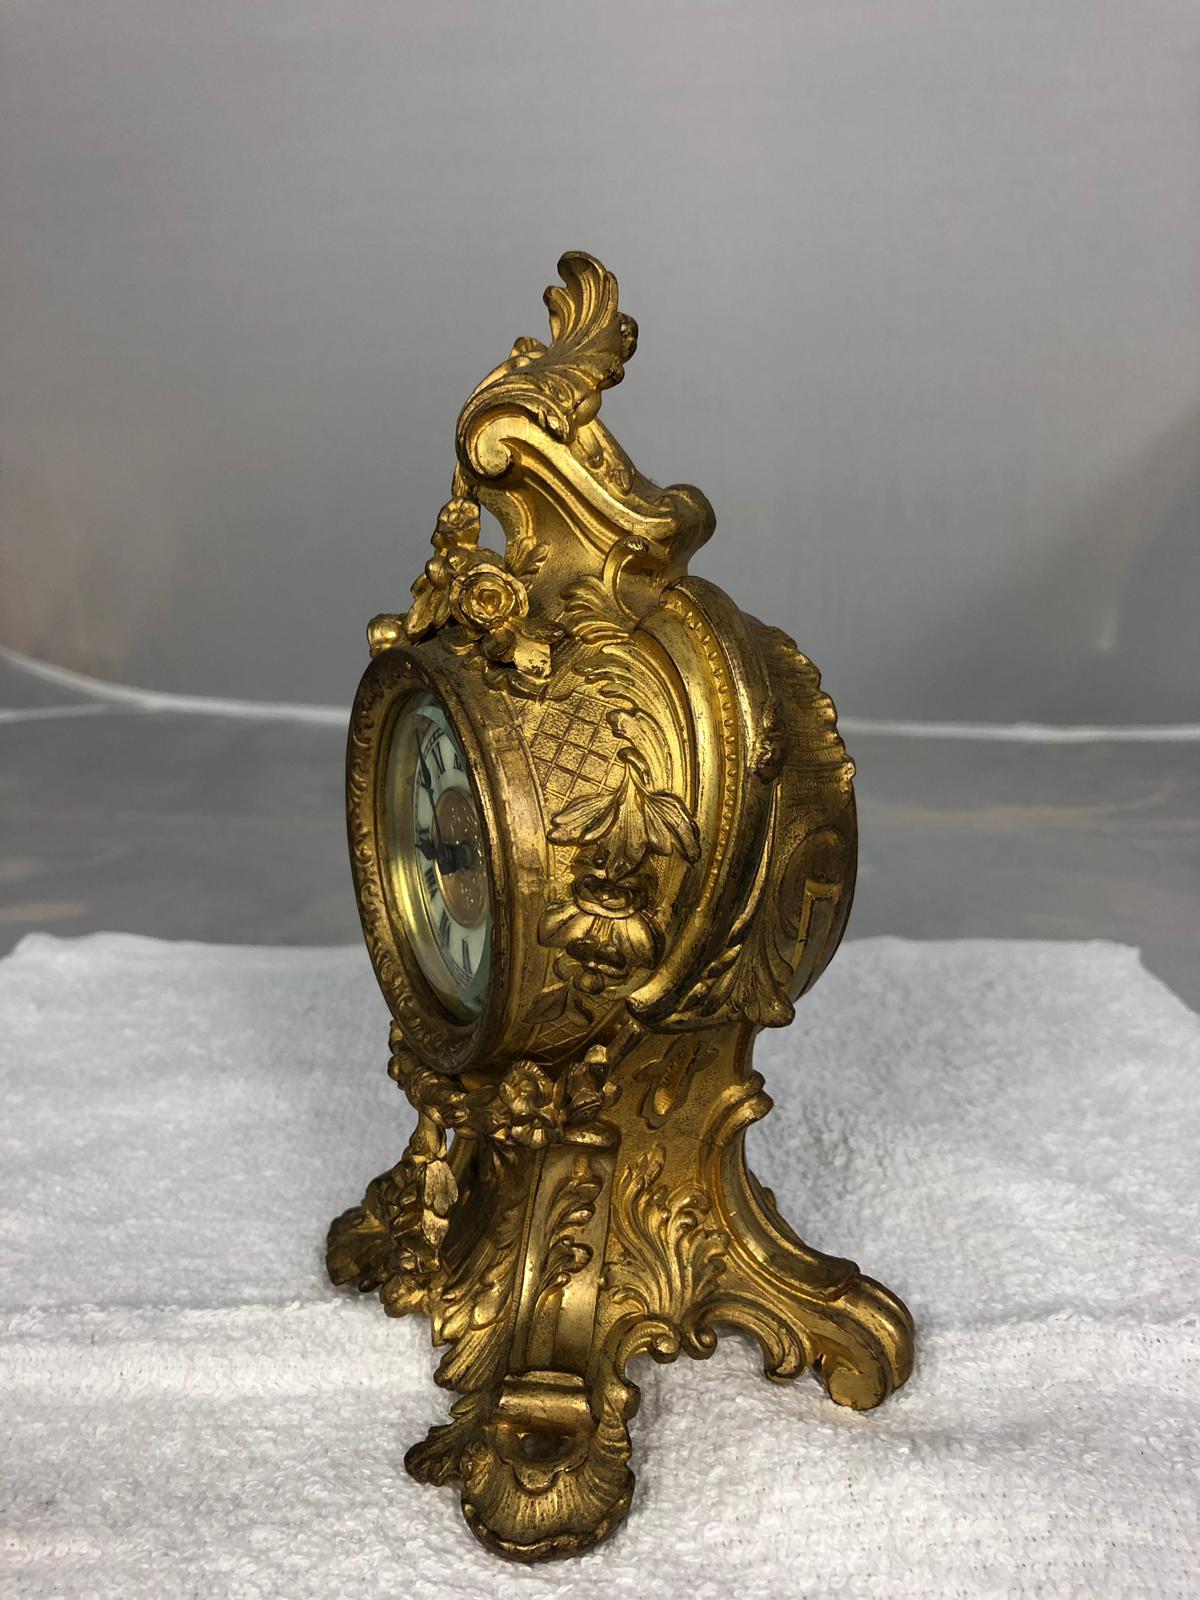 A Louis XVI style mantle clock late 19th century.
Prior to the 1848 Revolution, 19th century French furniture was named after Louis-Philippe d'Orleans, having less ornamentation, carving, gilding, and bronze, and more simple, rounded lines. This